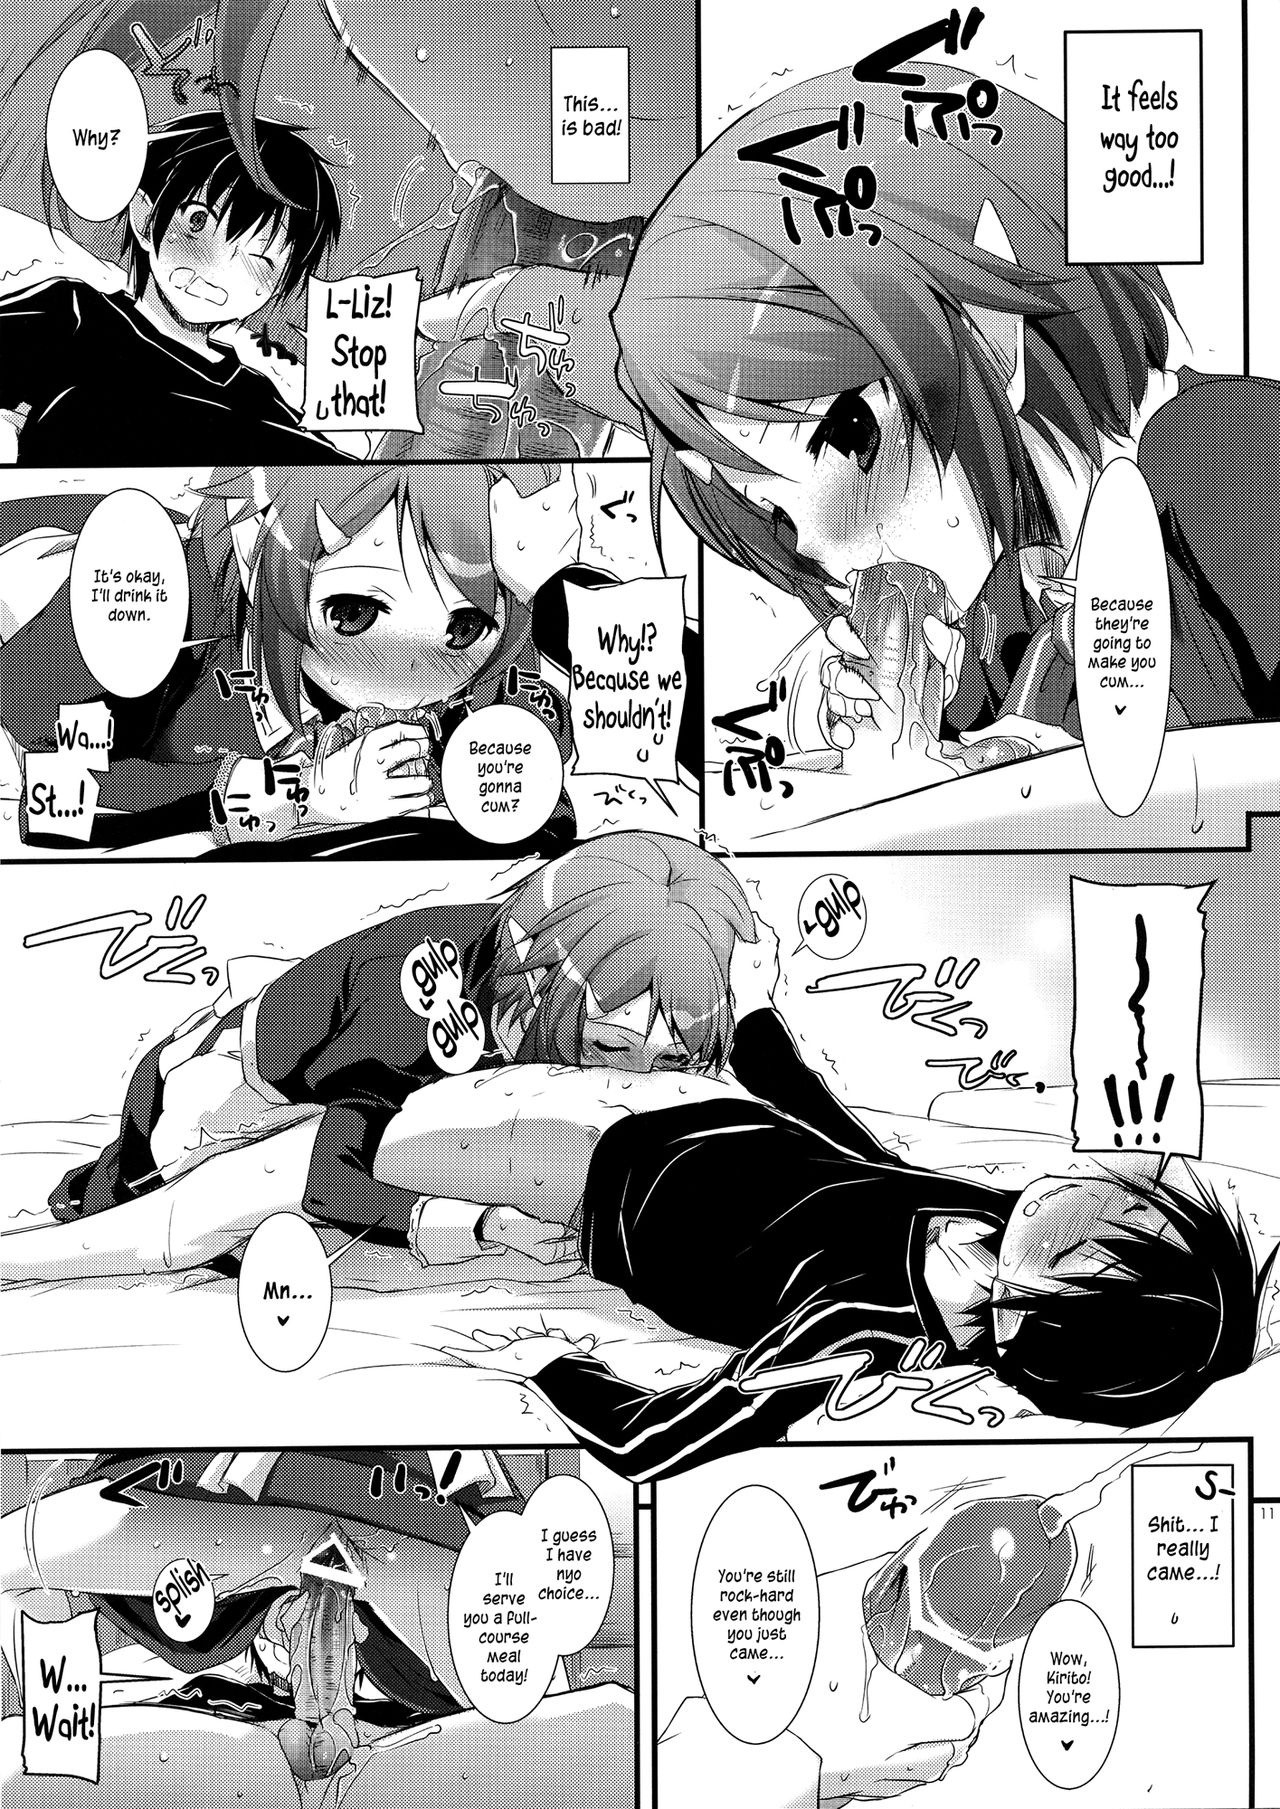 D.L. Action 72 hentai manga picture 10